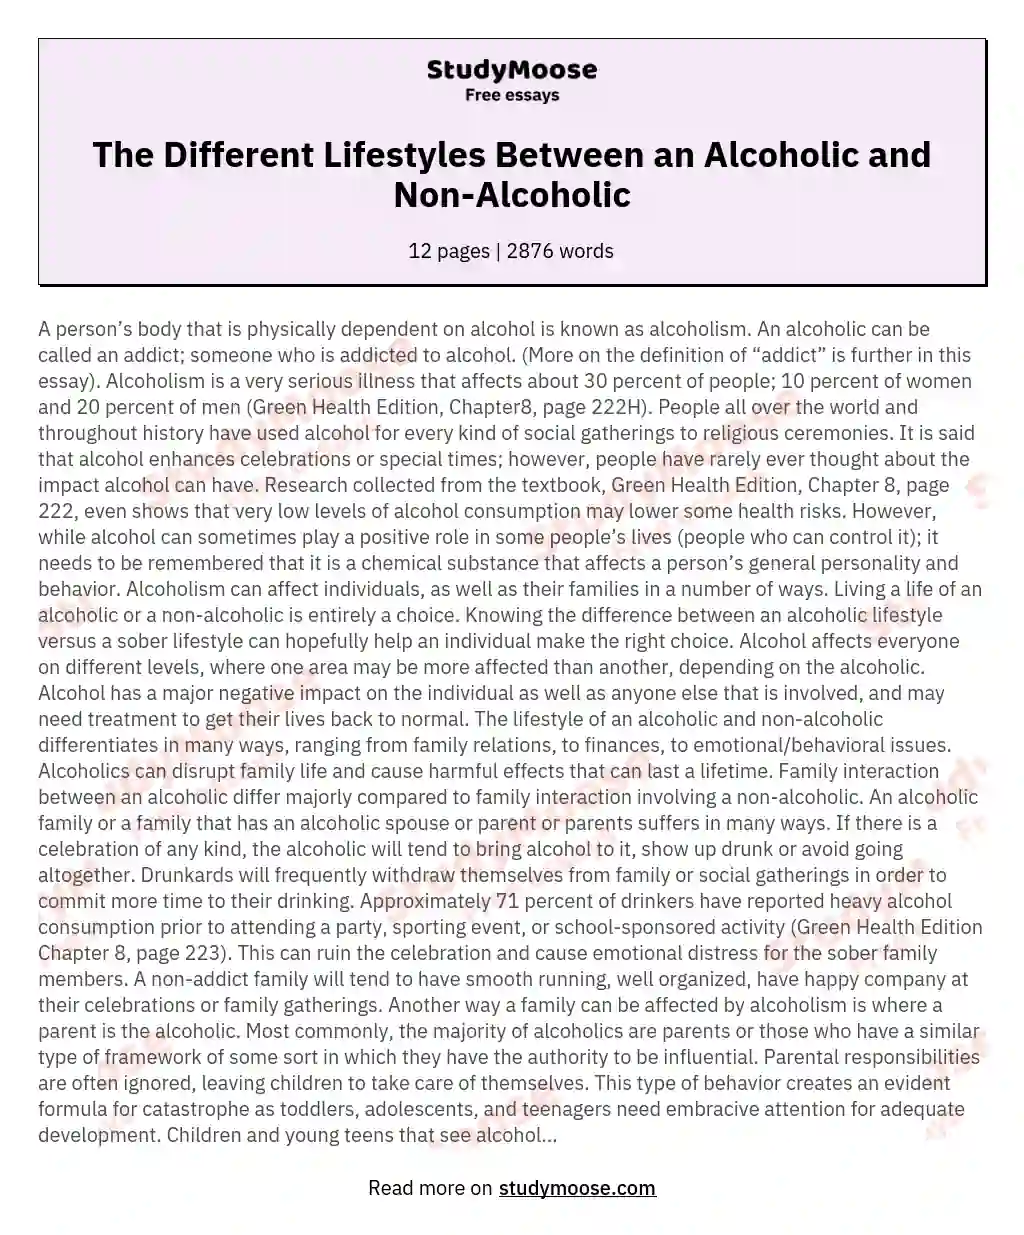 The Different Lifestyles Between an Alcoholic and Non-Alcoholic